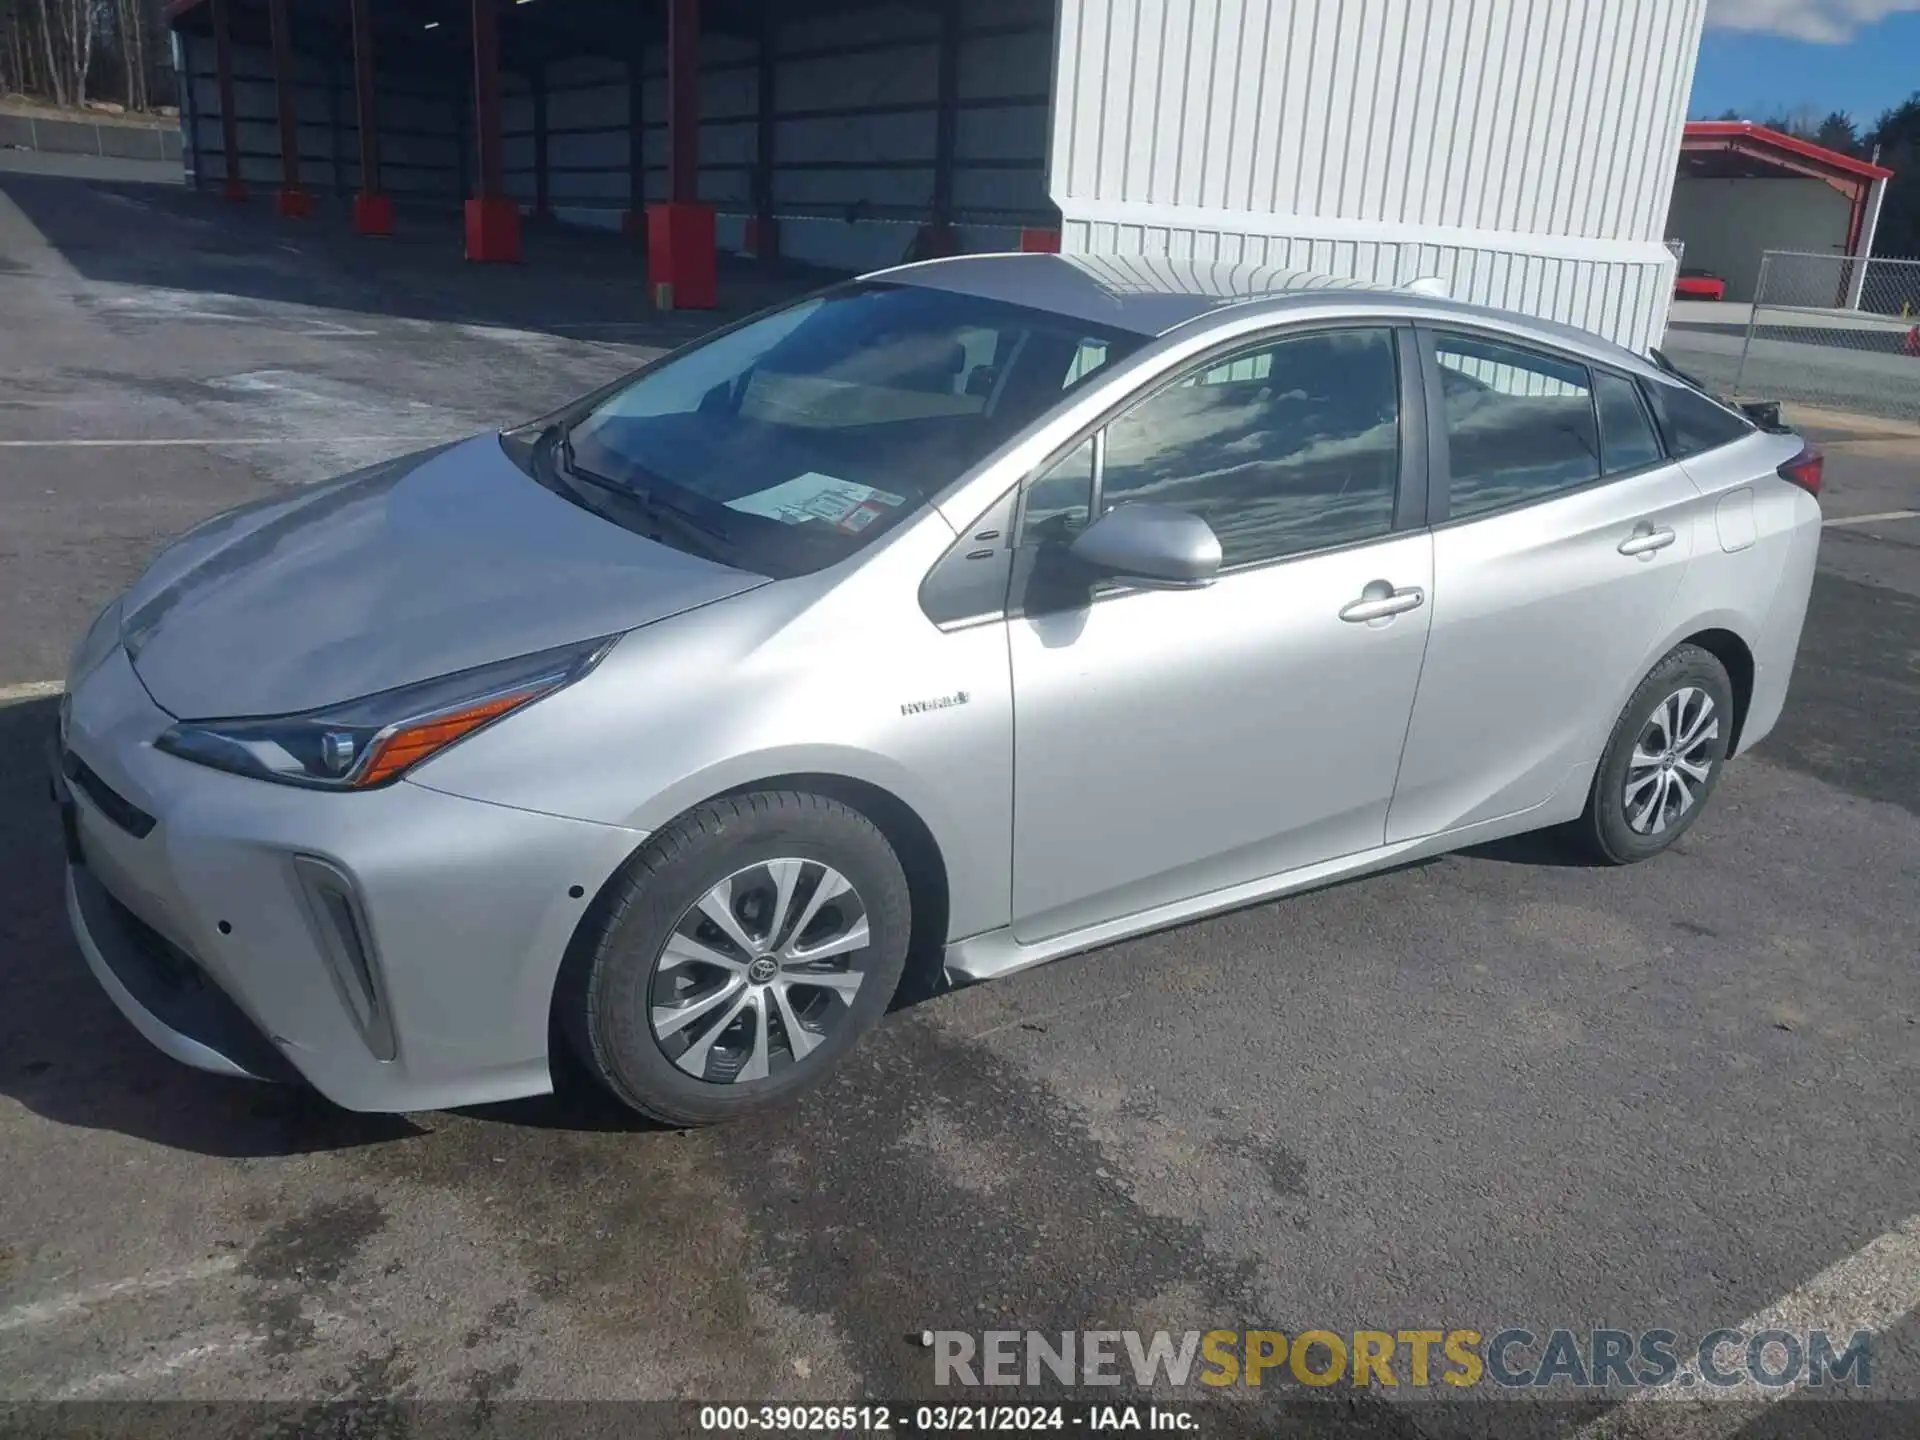 2 Photograph of a damaged car JTDL9MFUXN3037020 TOYOTA PRIUS 2022